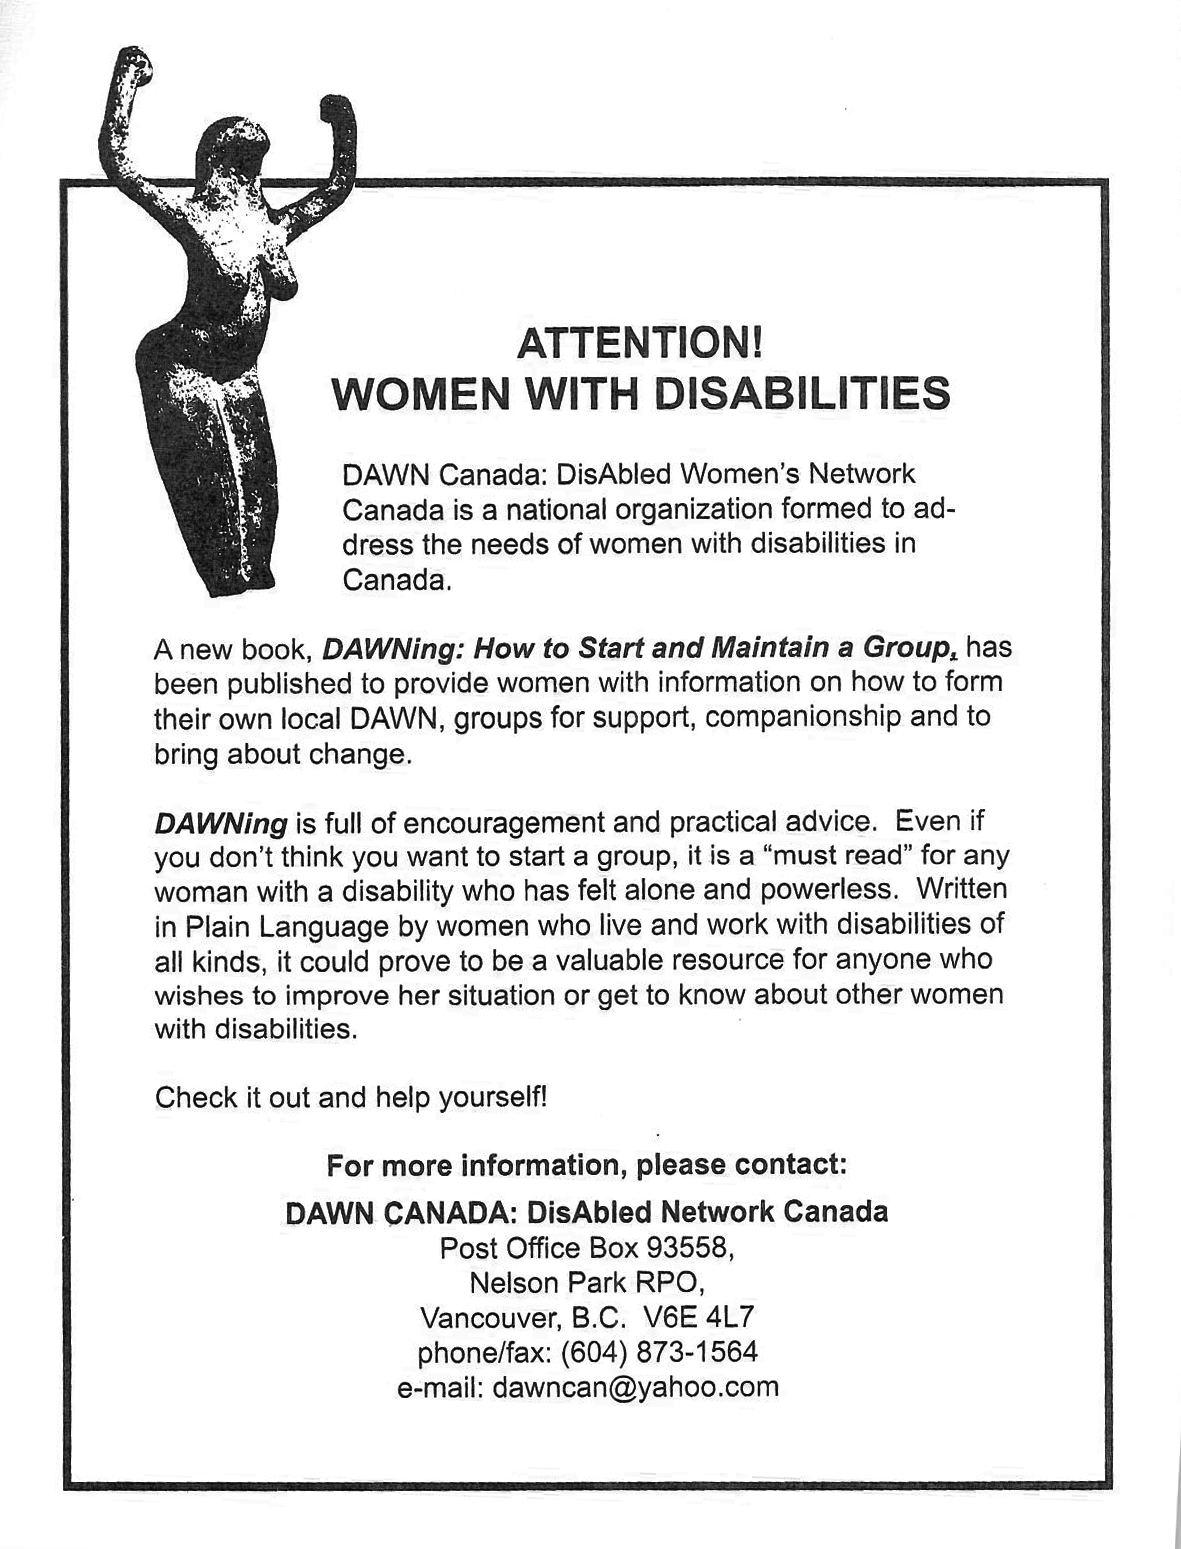 Scan of a flyer that contains the quoted text above